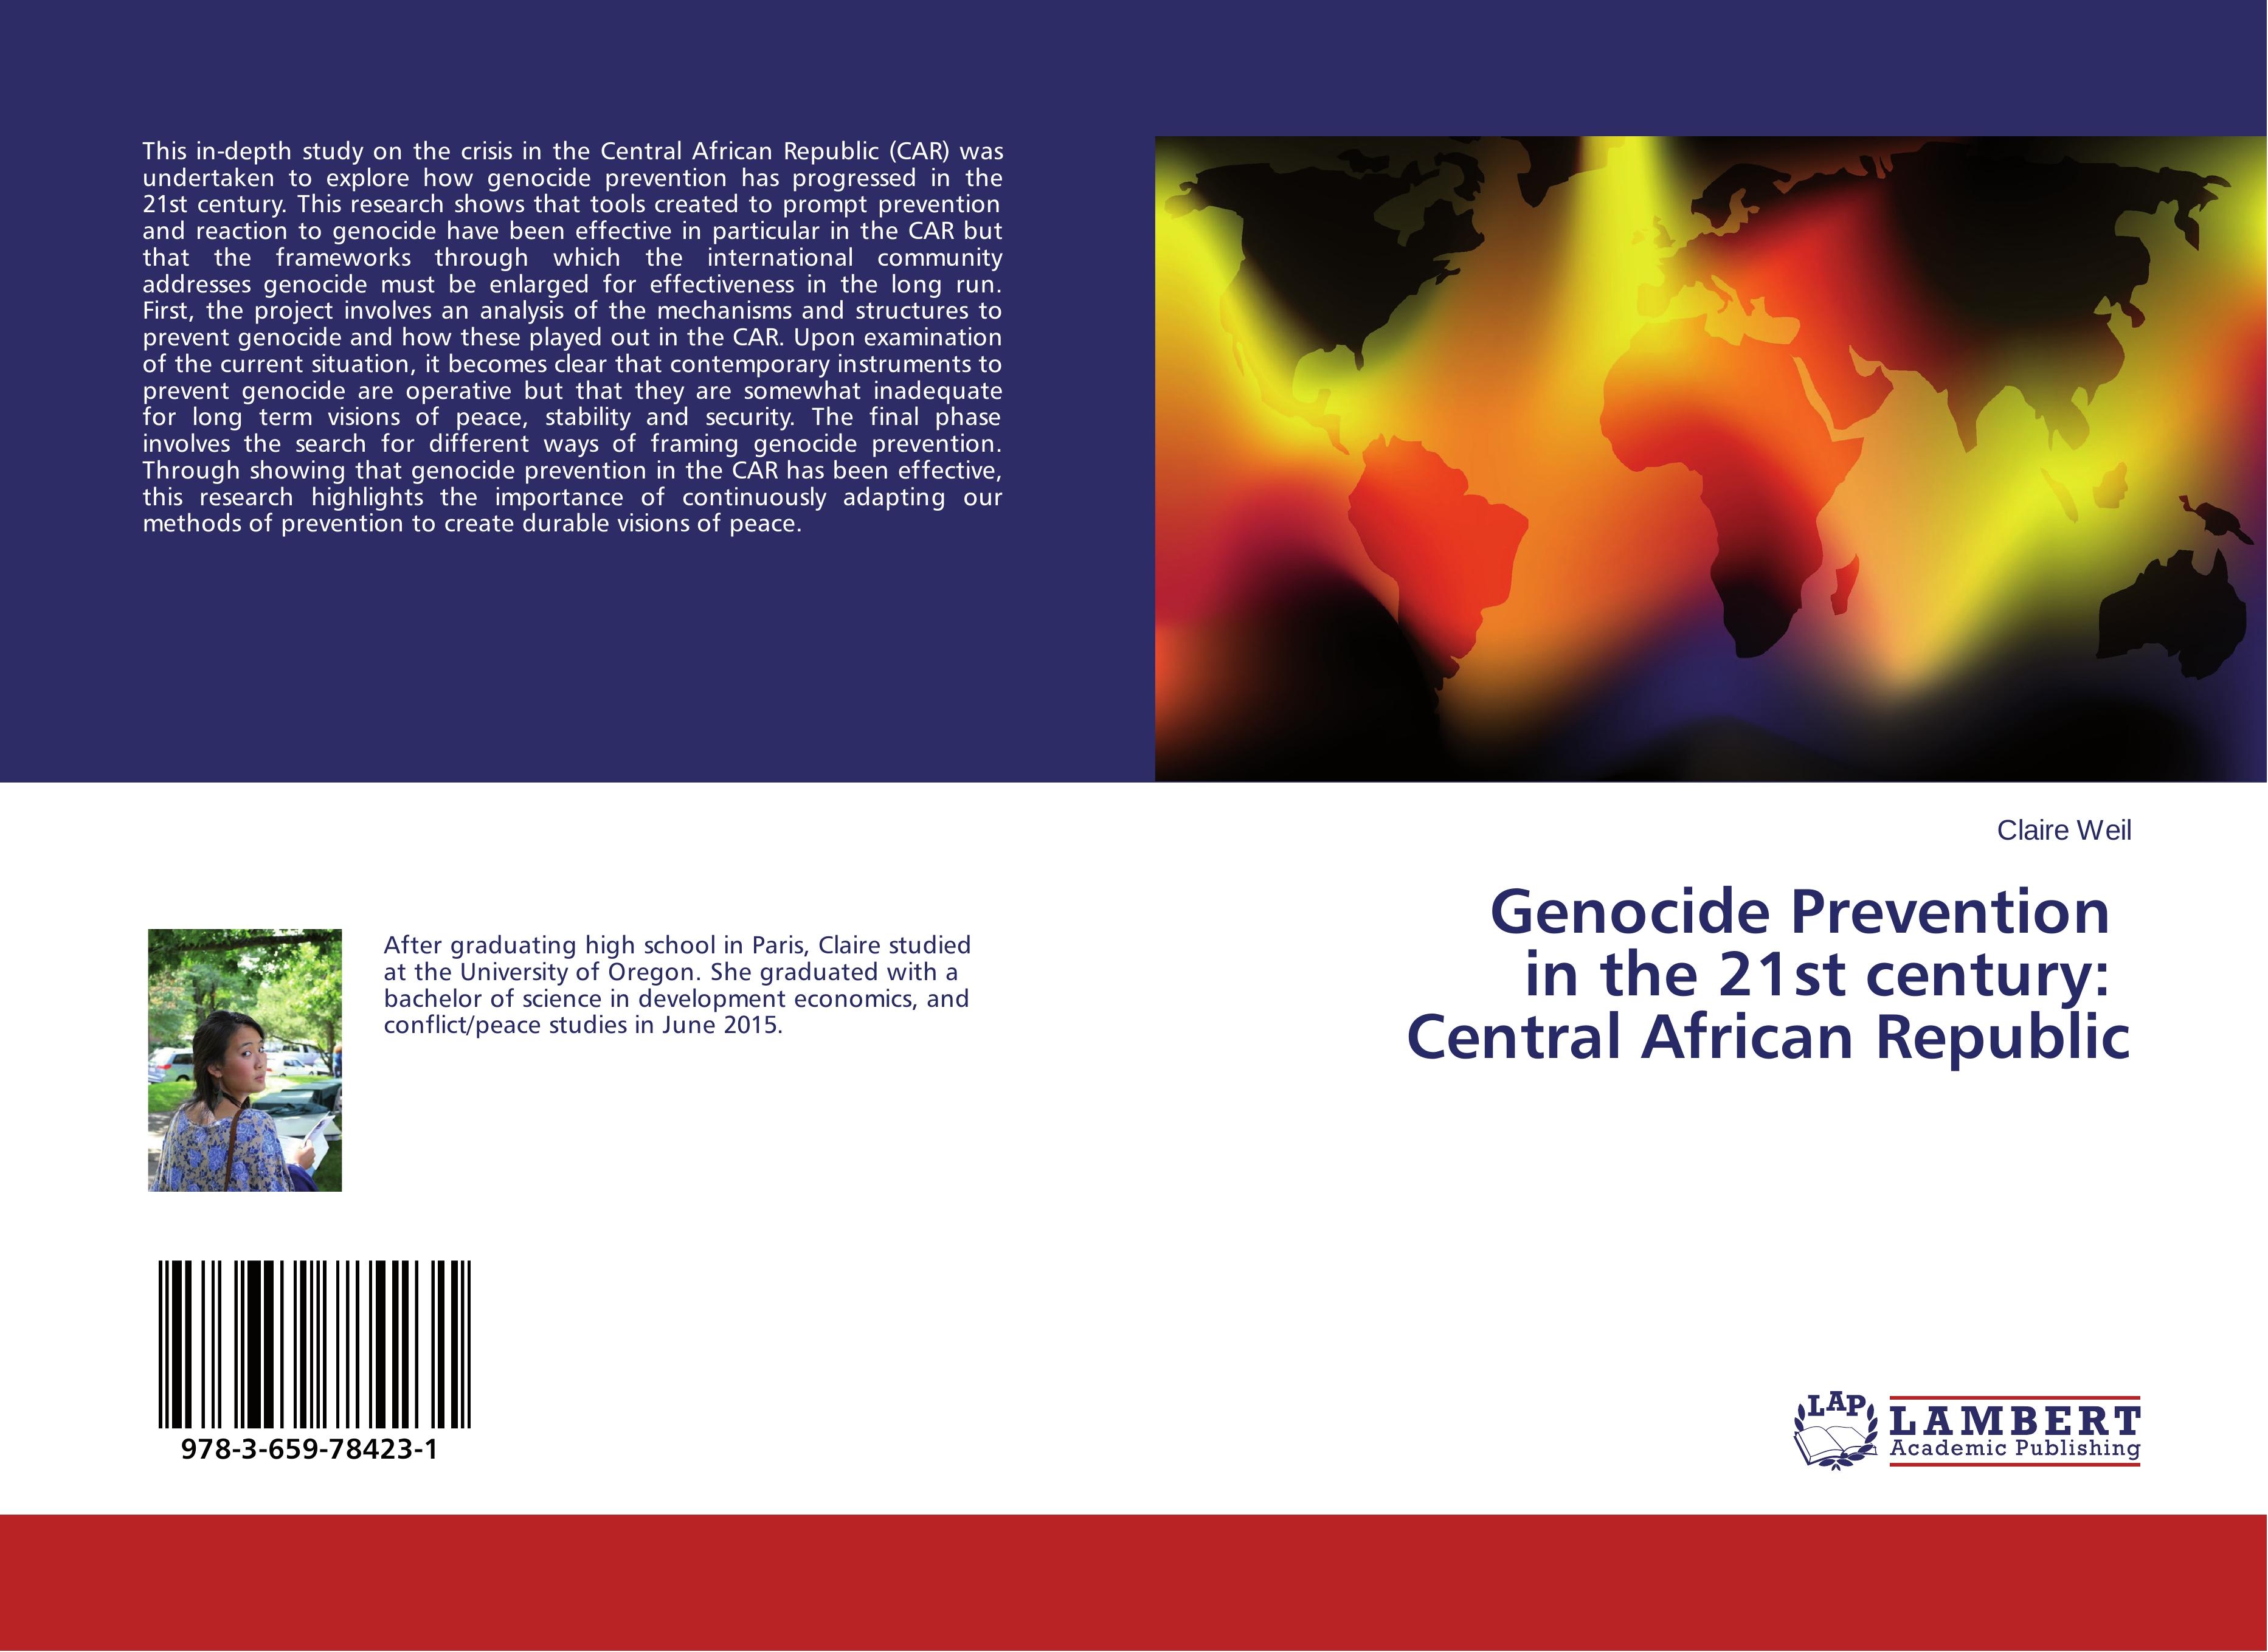 Genocide Prevention in the 21st century: Central African Republic - Claire Weil